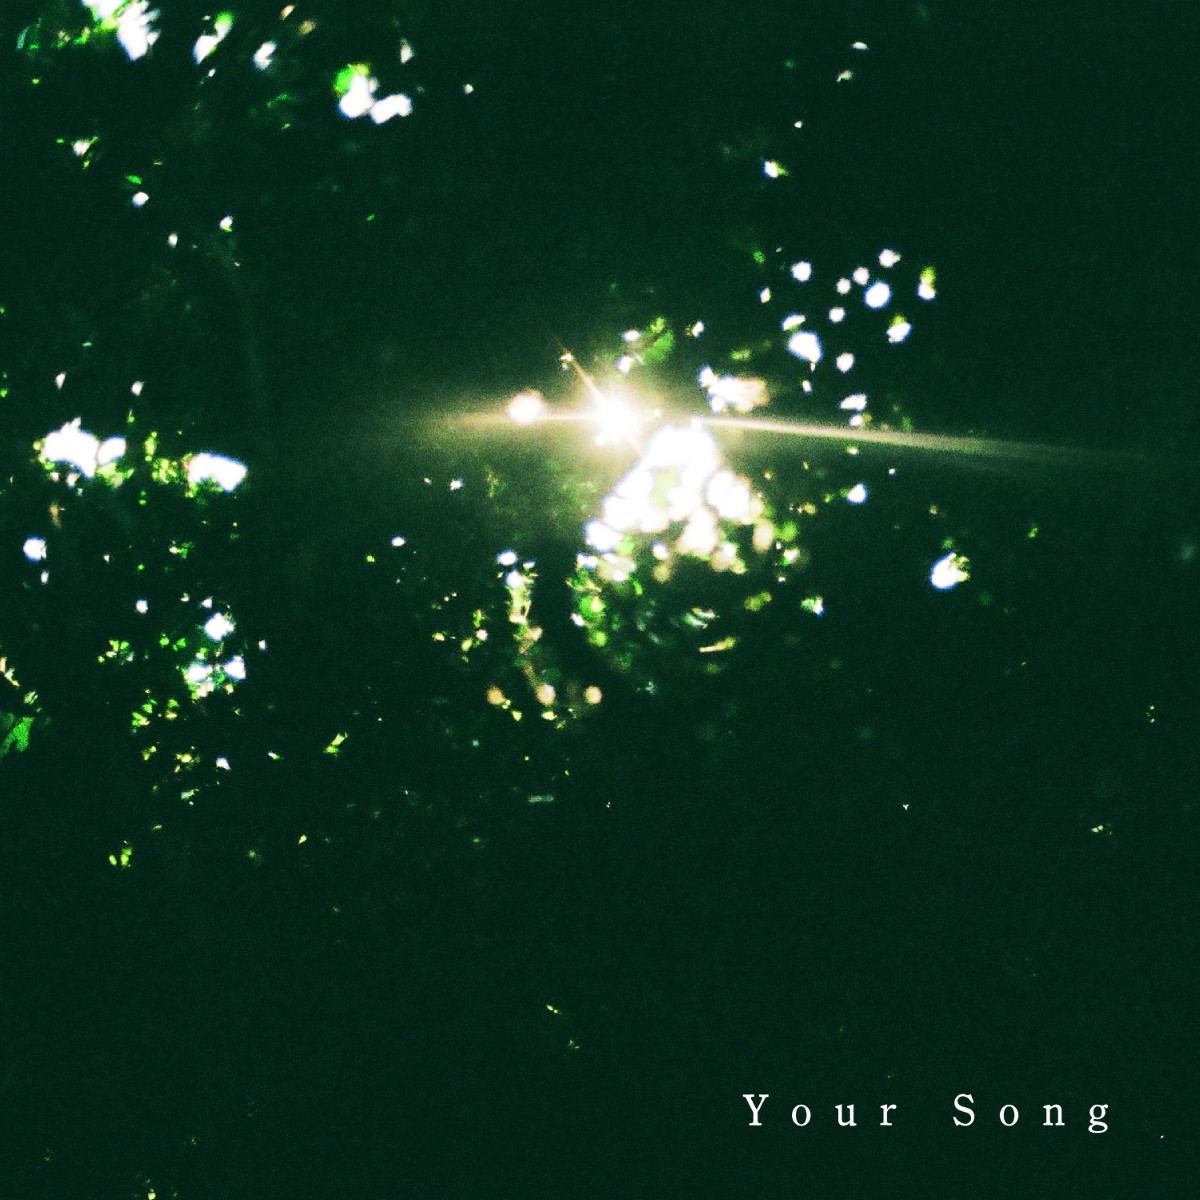 「Your Song」